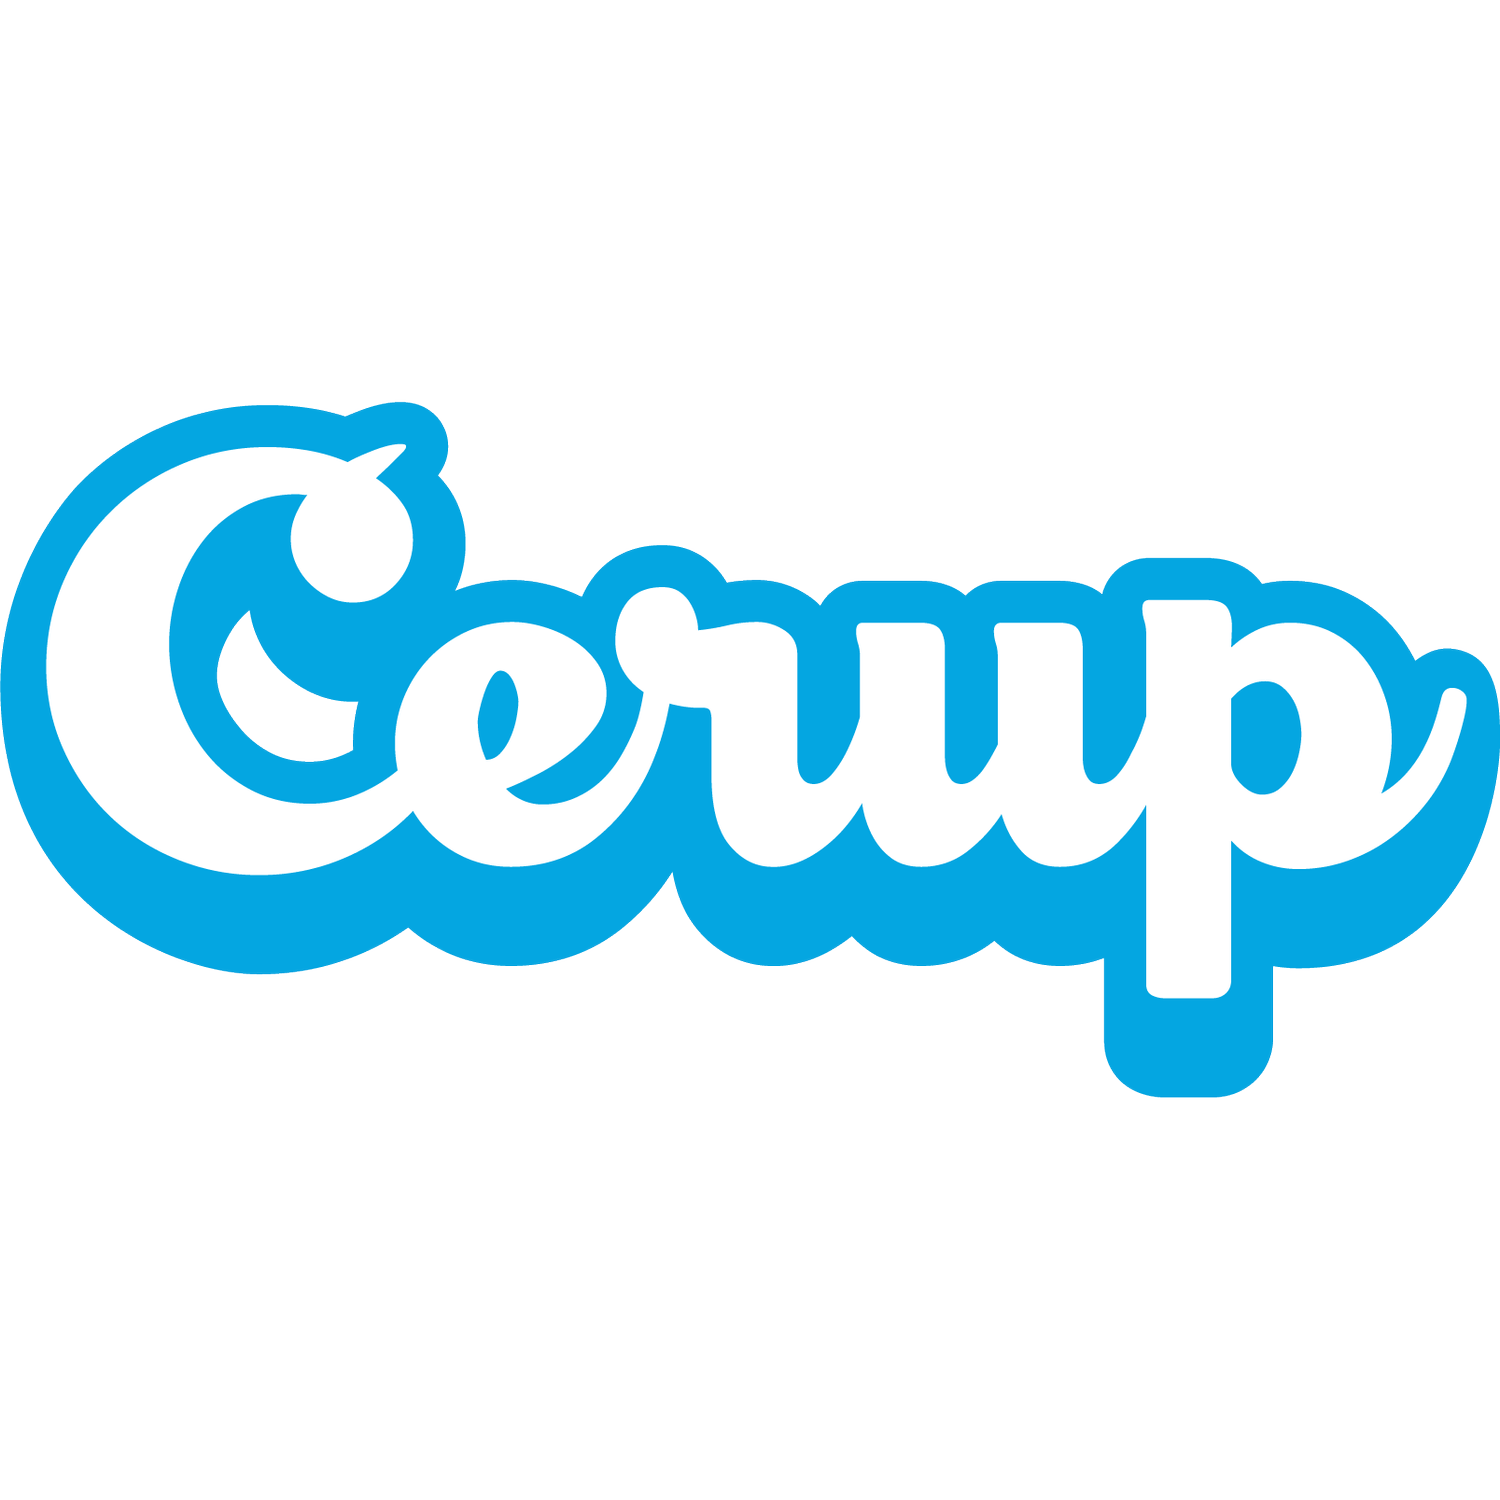 Cerup is syrup for cereal